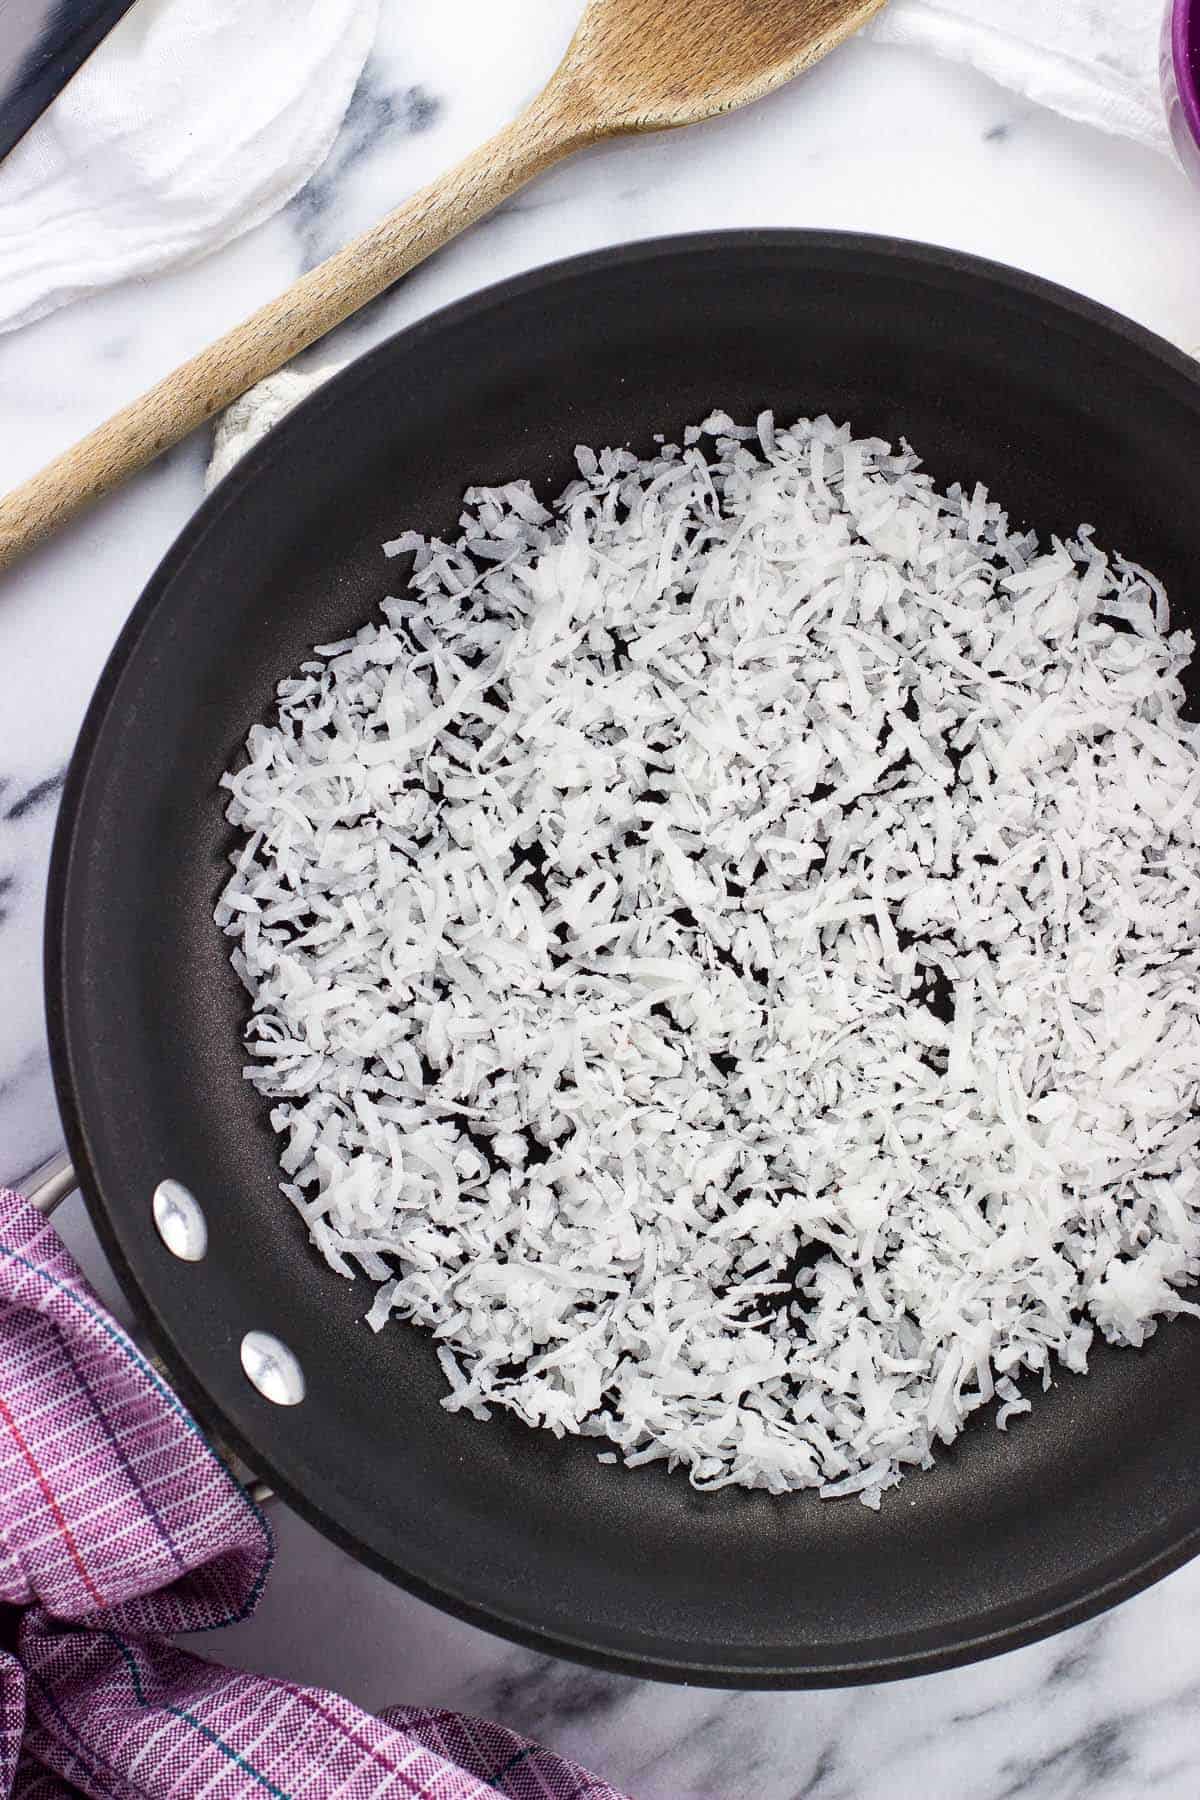 Sweetened flaked coconut in a pan before toasting.